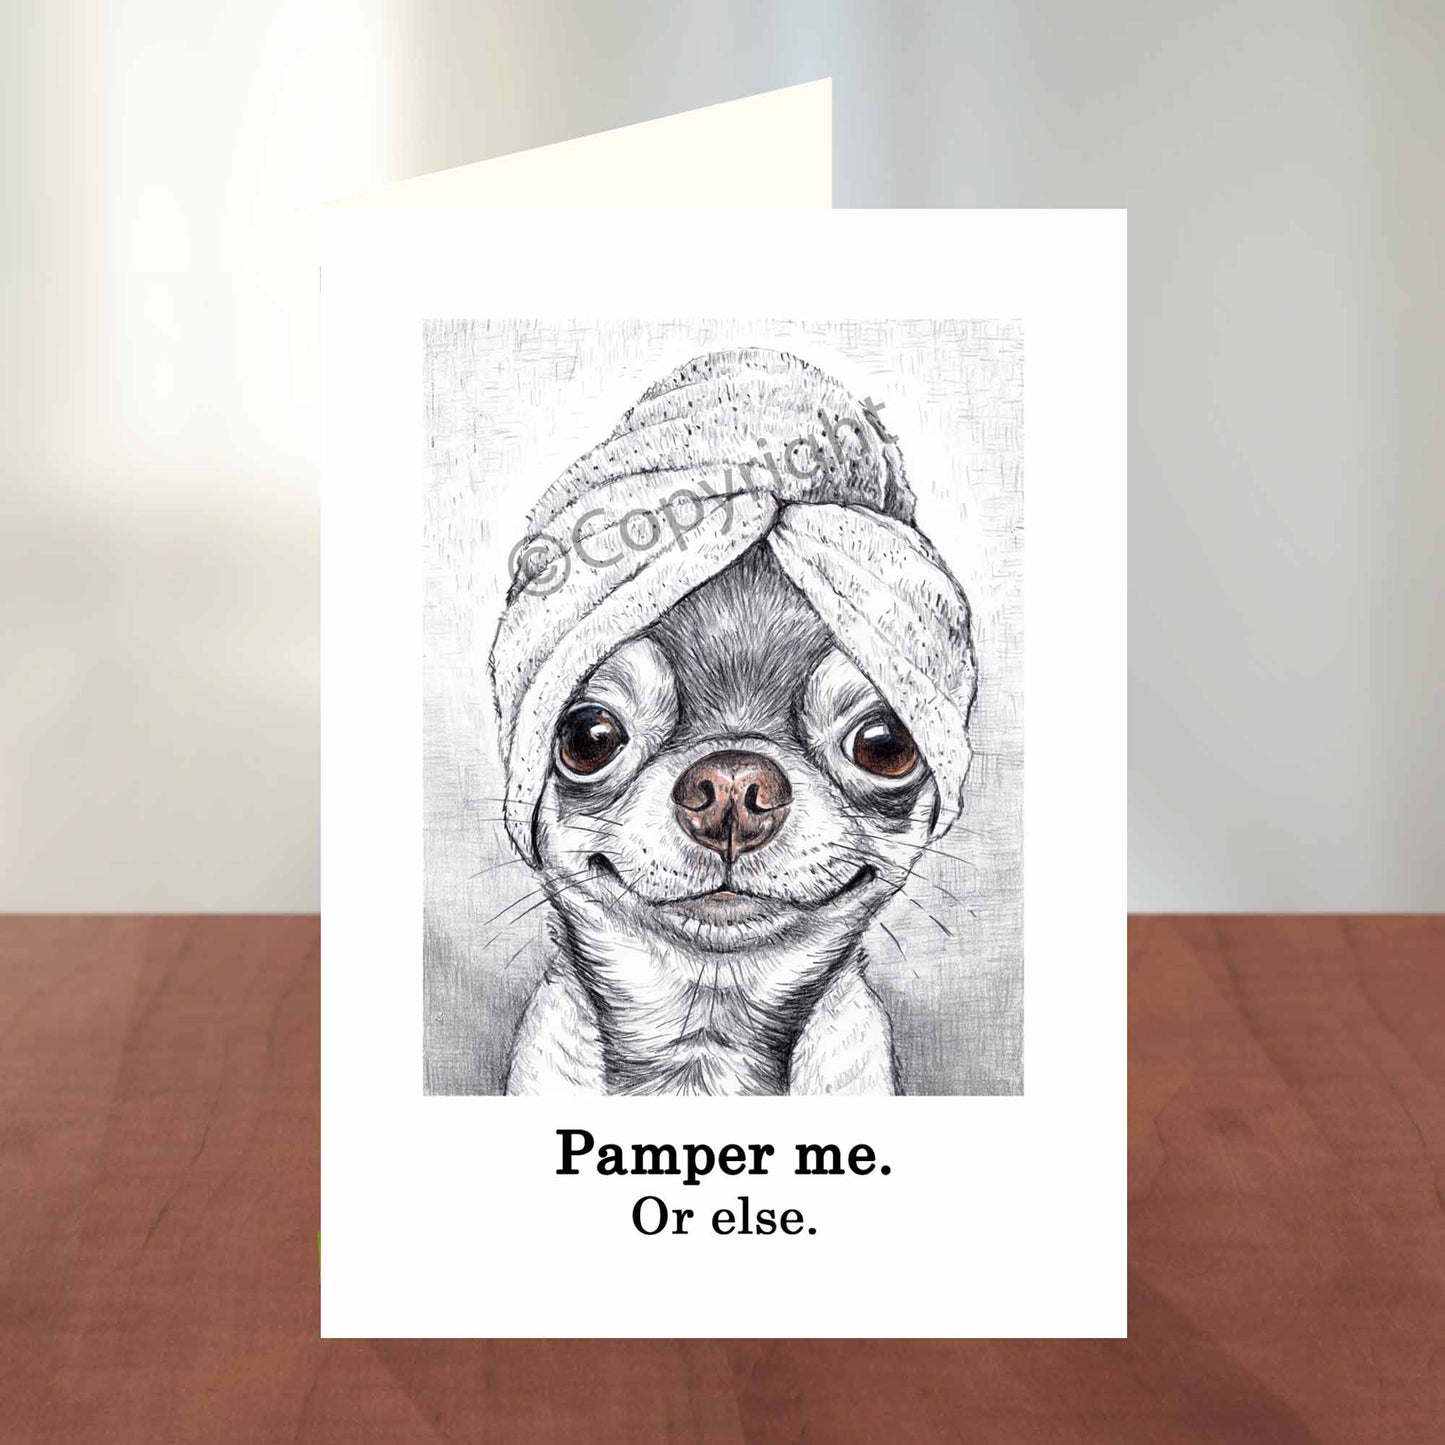 Greeting card featuring a crayon drawing of a sassy chihuahua dog wearing a bath towel on her head. By Deidre Wicks